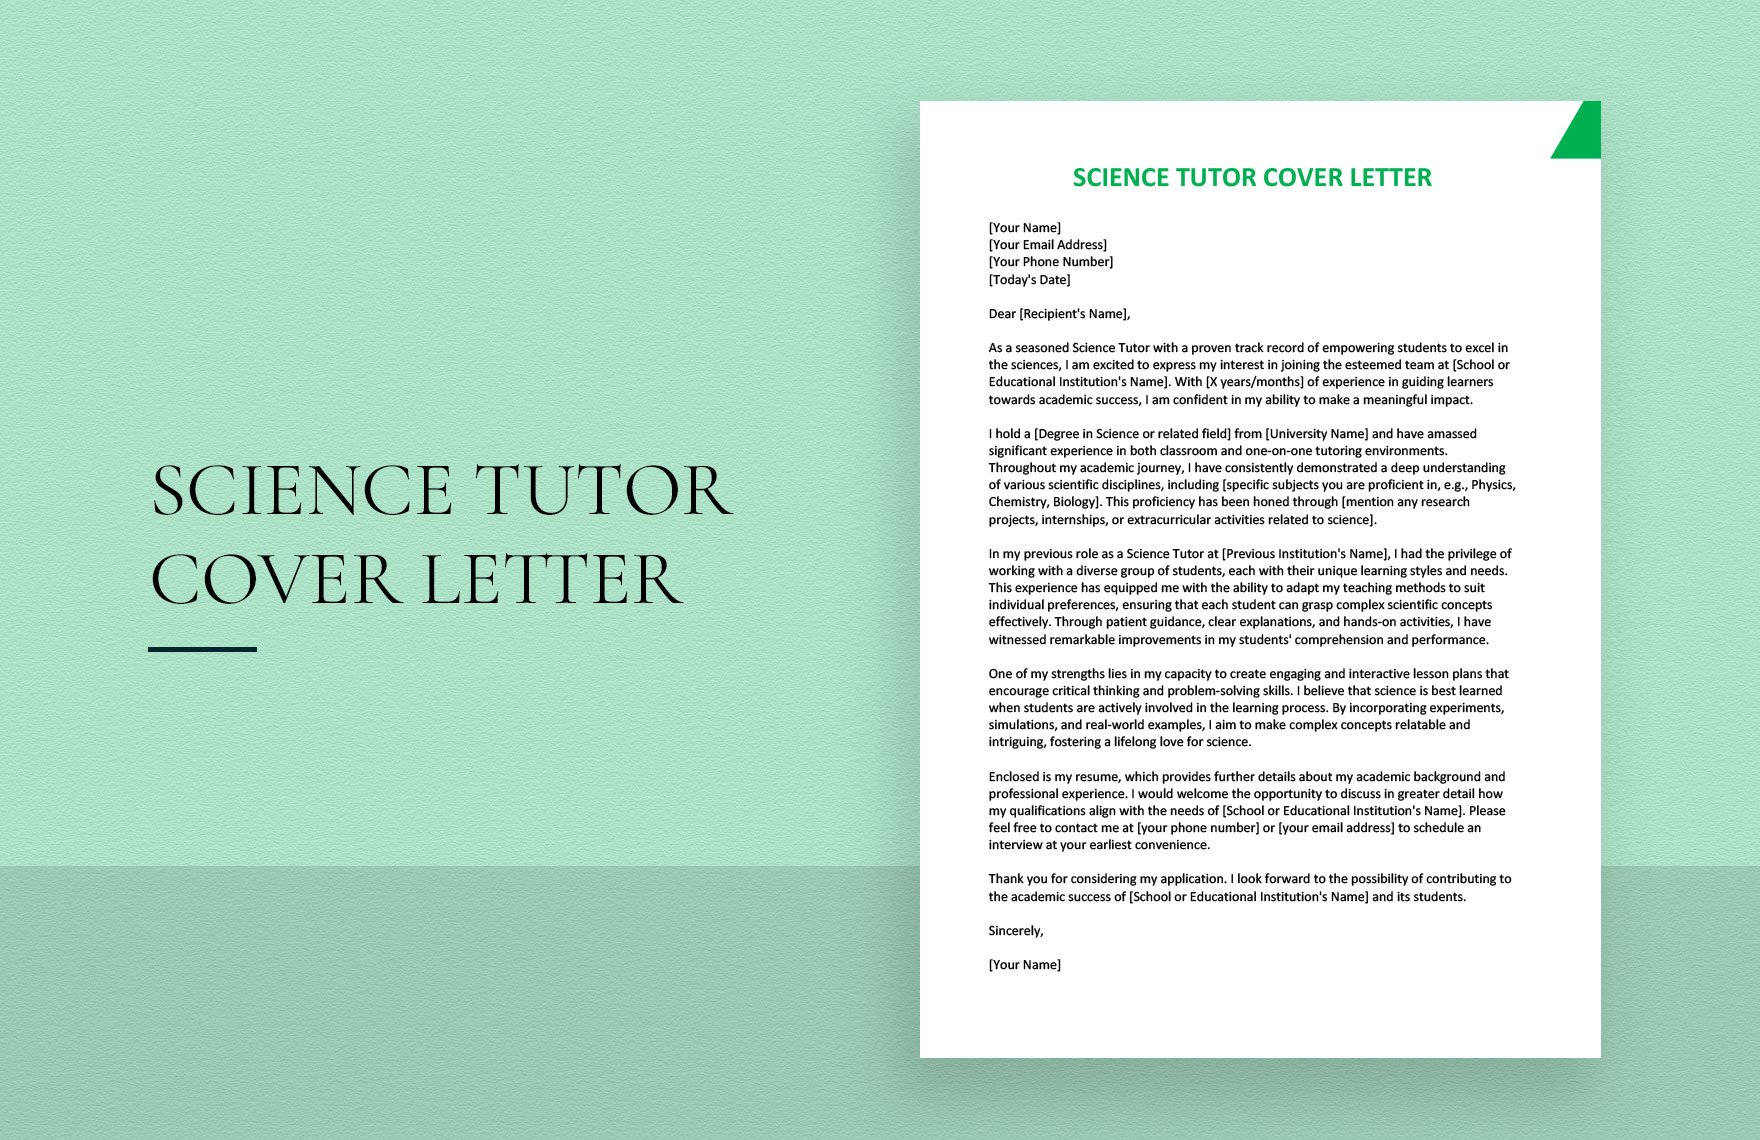 Science Tutor Cover Letter in Word, Google Docs